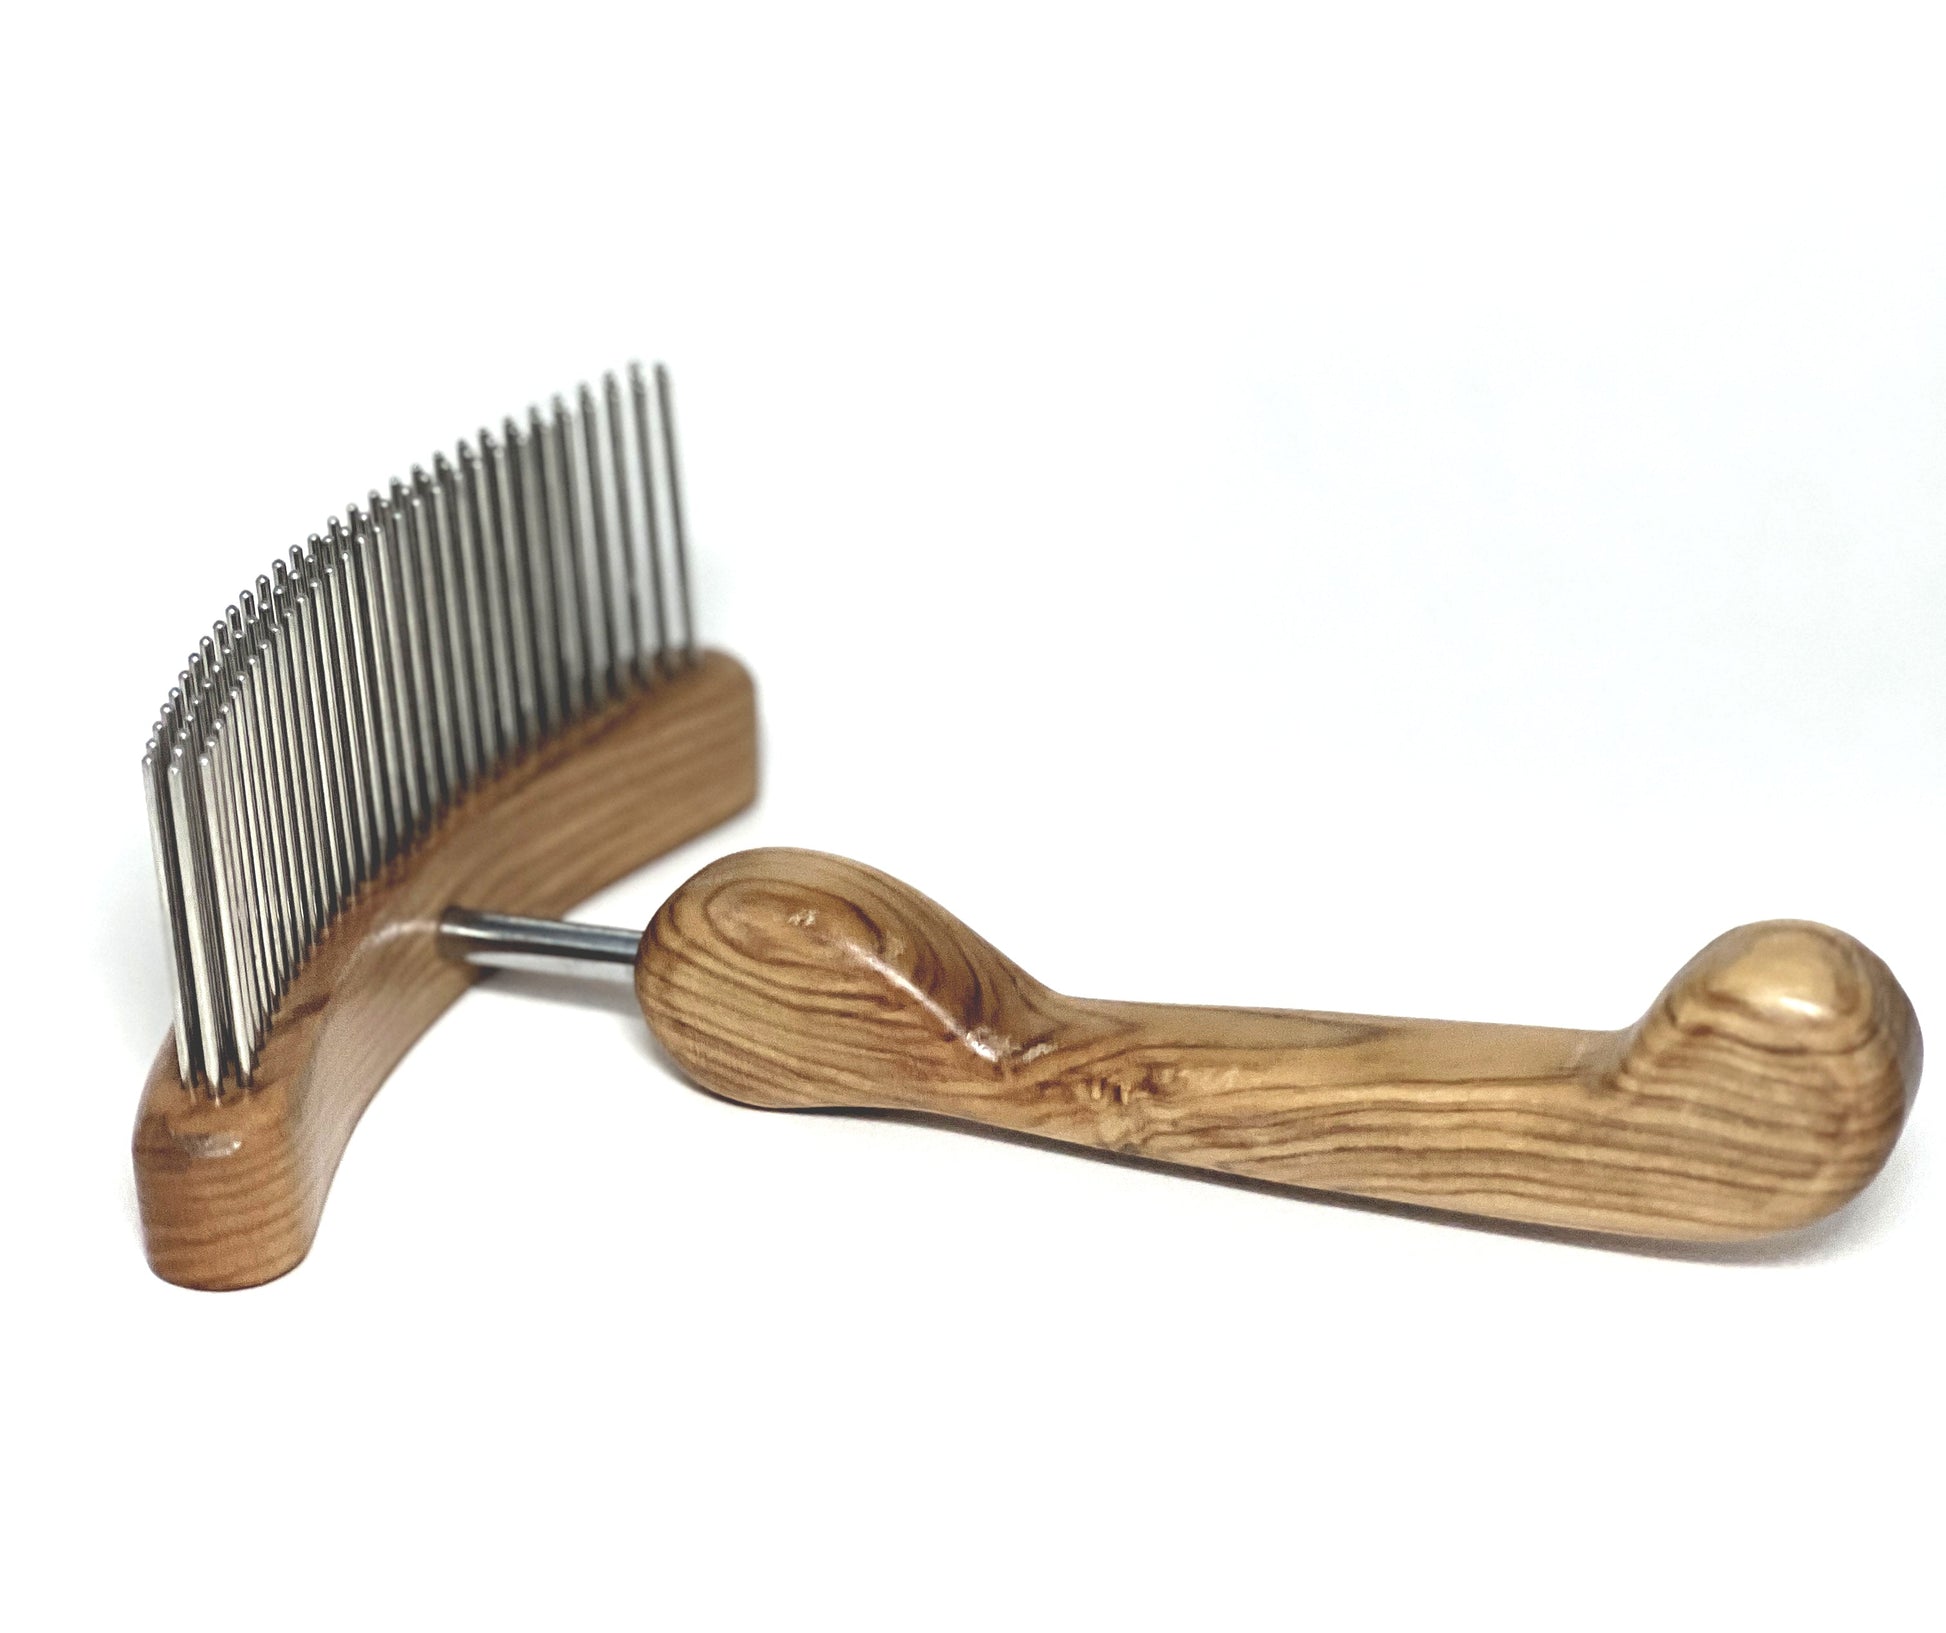 The Aaronco® Undercoat'R™ Professional Pet Grooming Rake is ideal with medium to long double coats. Designed by industry leader Sam Kohl, it untangle knots, remove dense undercoat and reduce excess topcoat. Its curved stainless steel head and blunt tines offer increased coat removal without damageing the fur or skin.